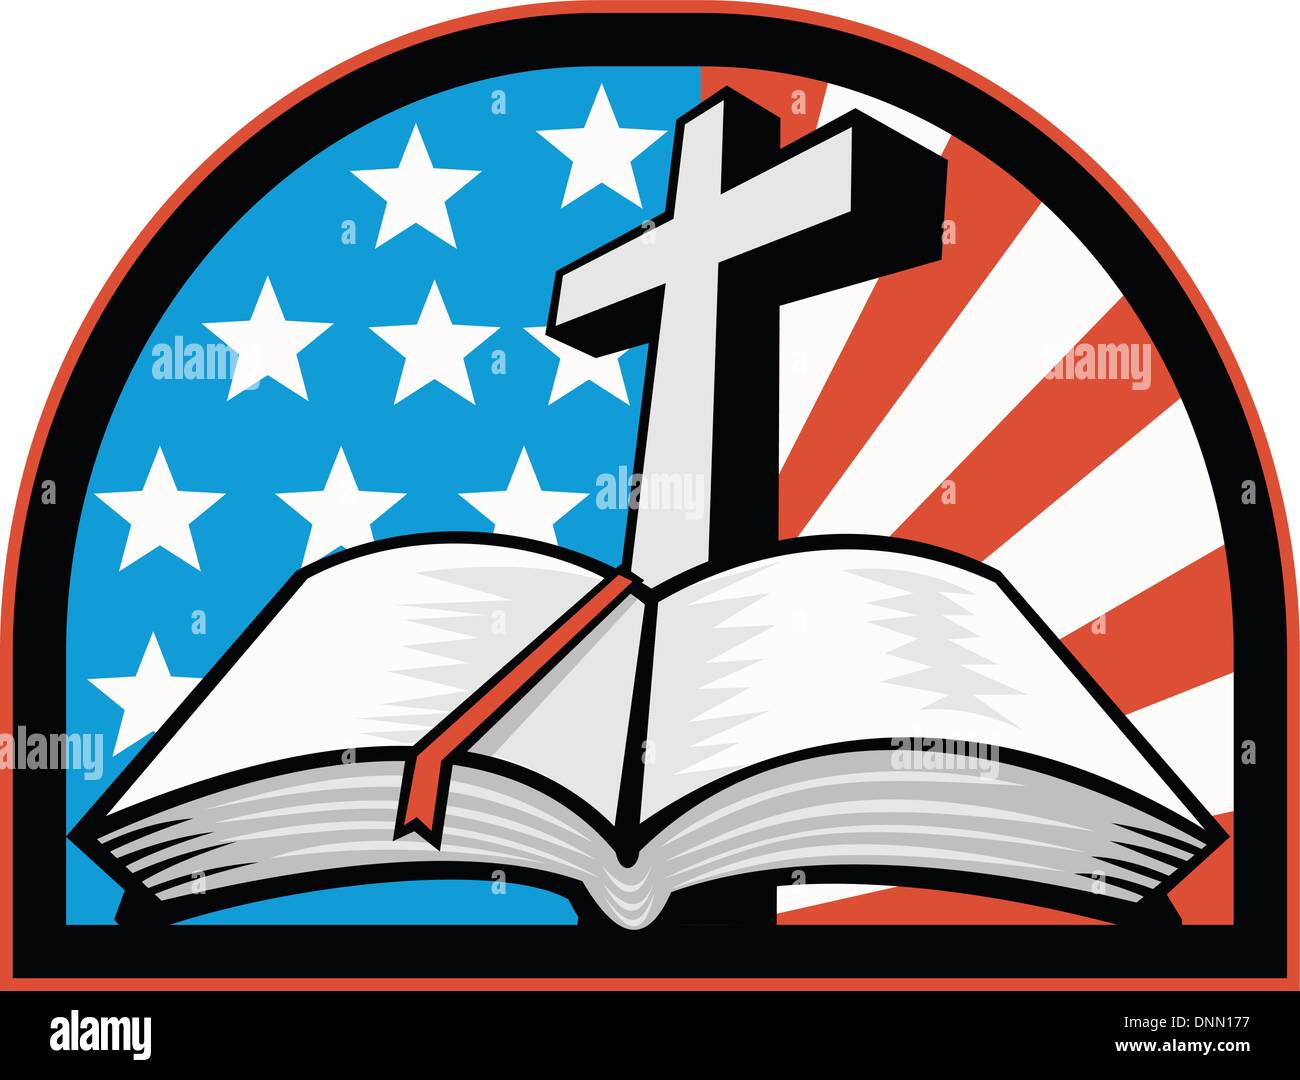 Illustration of the holy bible with cross and American flag stars and stripes. Stock Vector